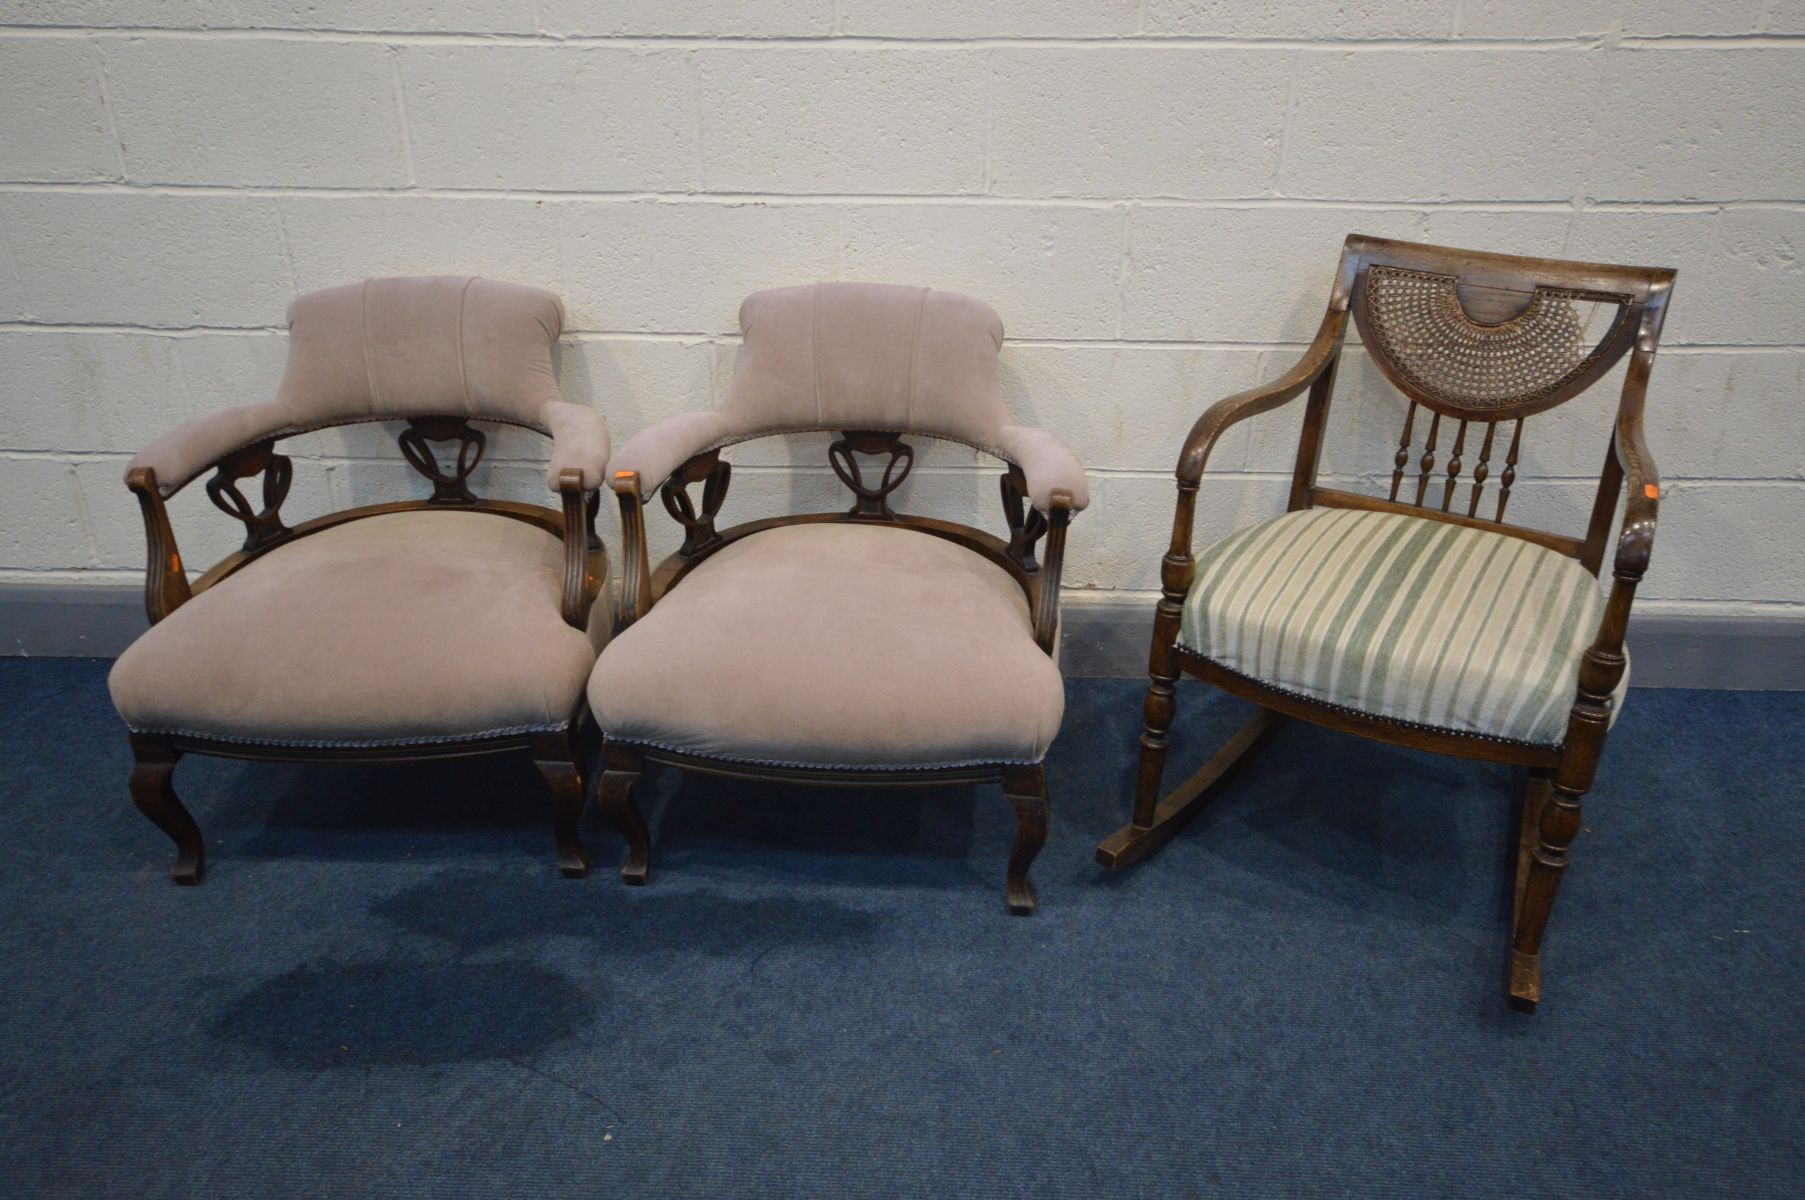 A PAIR OF EDWARDIAN MAHOGANY TUB CHAIRS, with Art Nouveau back, along with a beech bergère rocking